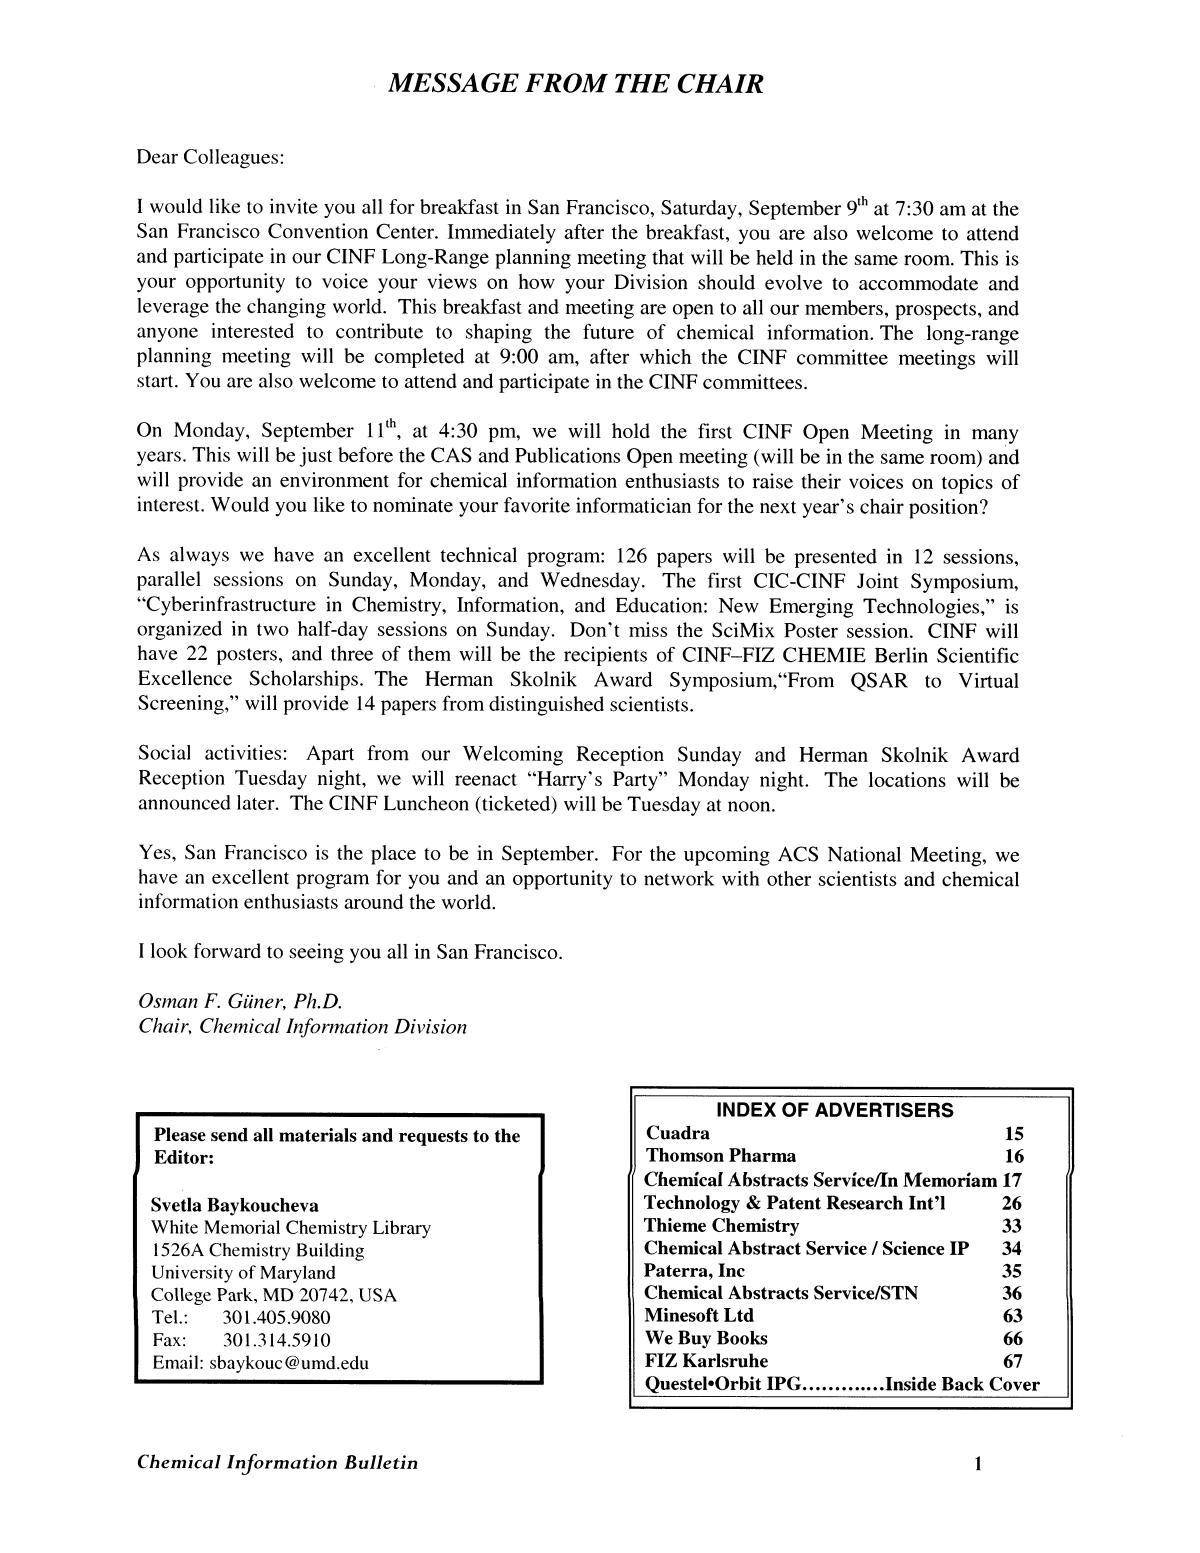 Chemical Information Bulletin, Volume 58, Number 2, Fall 2006
                                                
                                                    1
                                                